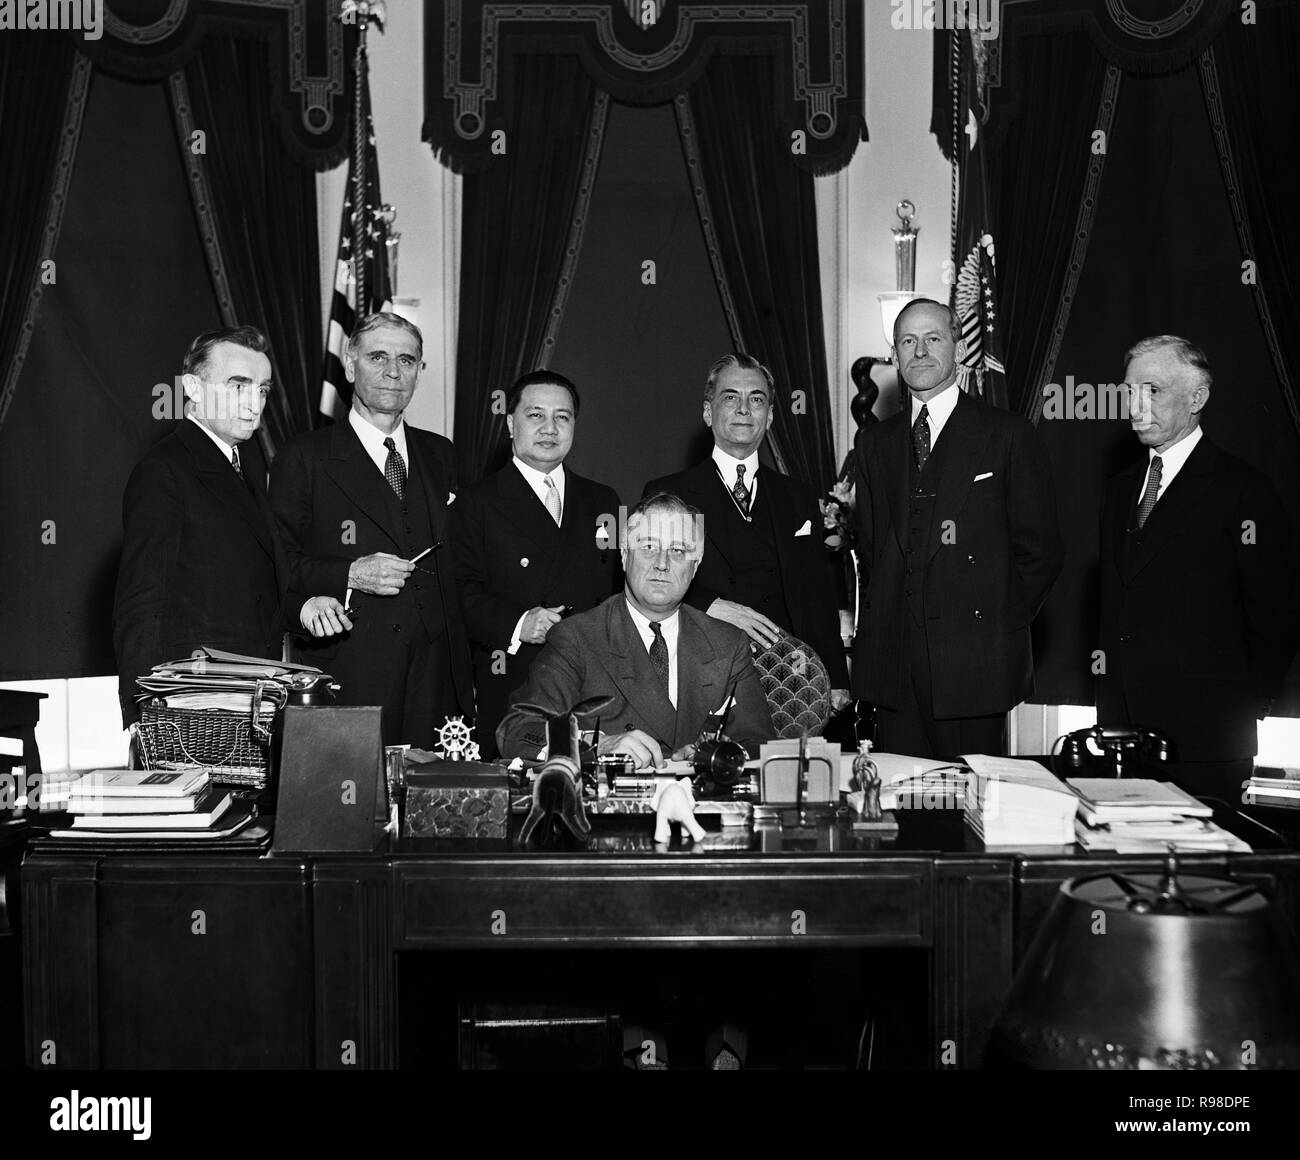 U.S. President Franklin Roosevelt Signing Philippine Independence Act, Oval Office, White House, Washington DC, USA, Harris & Ewing, March 24, 1934 Stock Photo